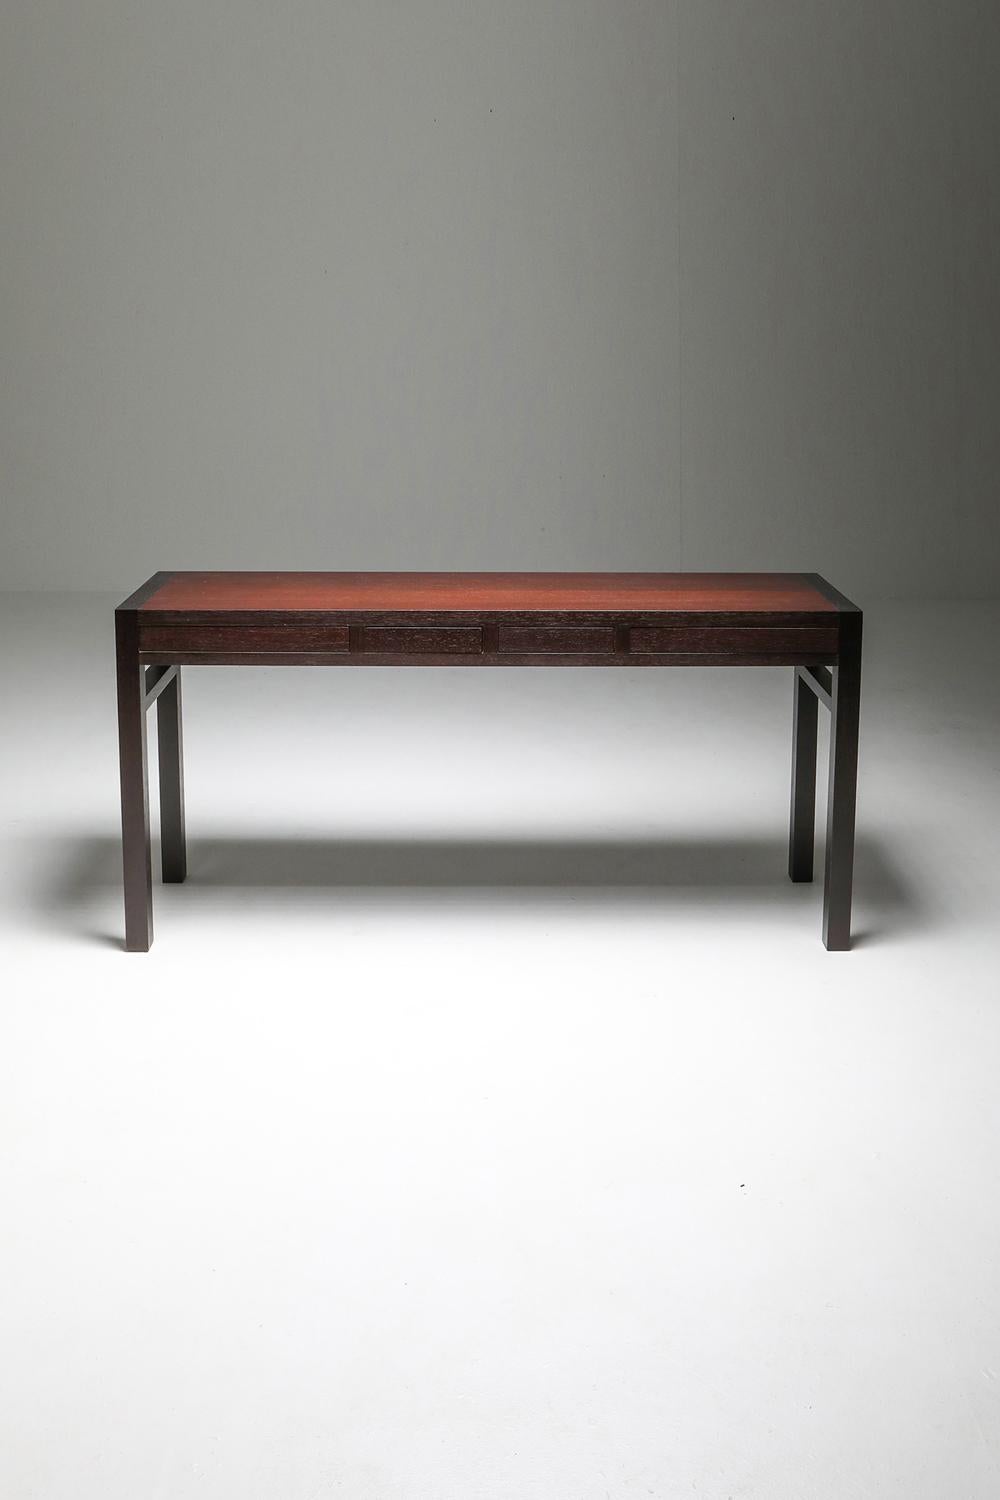 Christian Liaigre, console table, Mystere, France 1999

Christian Liaigre was a French interior designer and architect.
Born into a family from Vendée, Liaigre entered the École nationale supérieure des Beaux-Arts and the École nationale